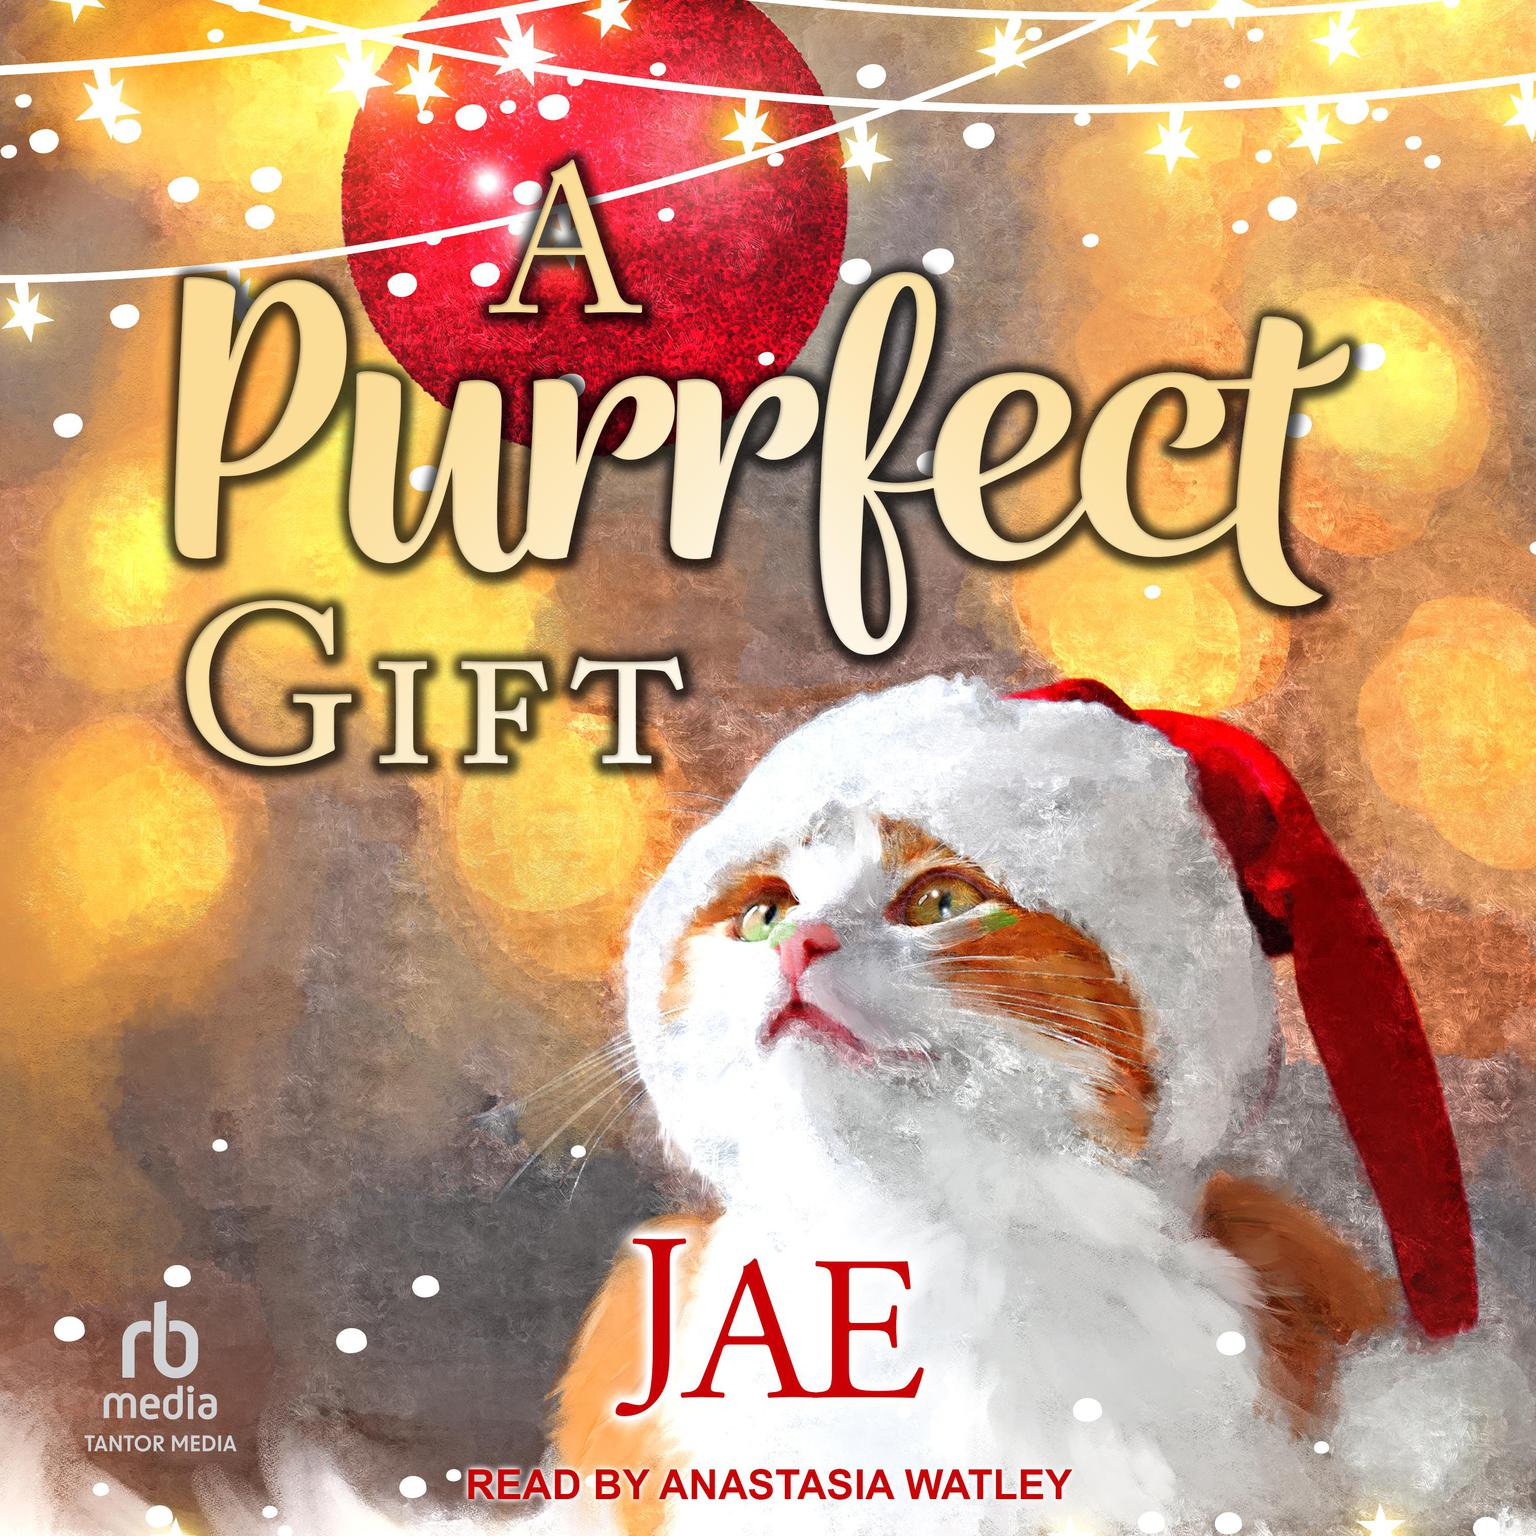 A Purrfect Gift Audiobook, by Jae